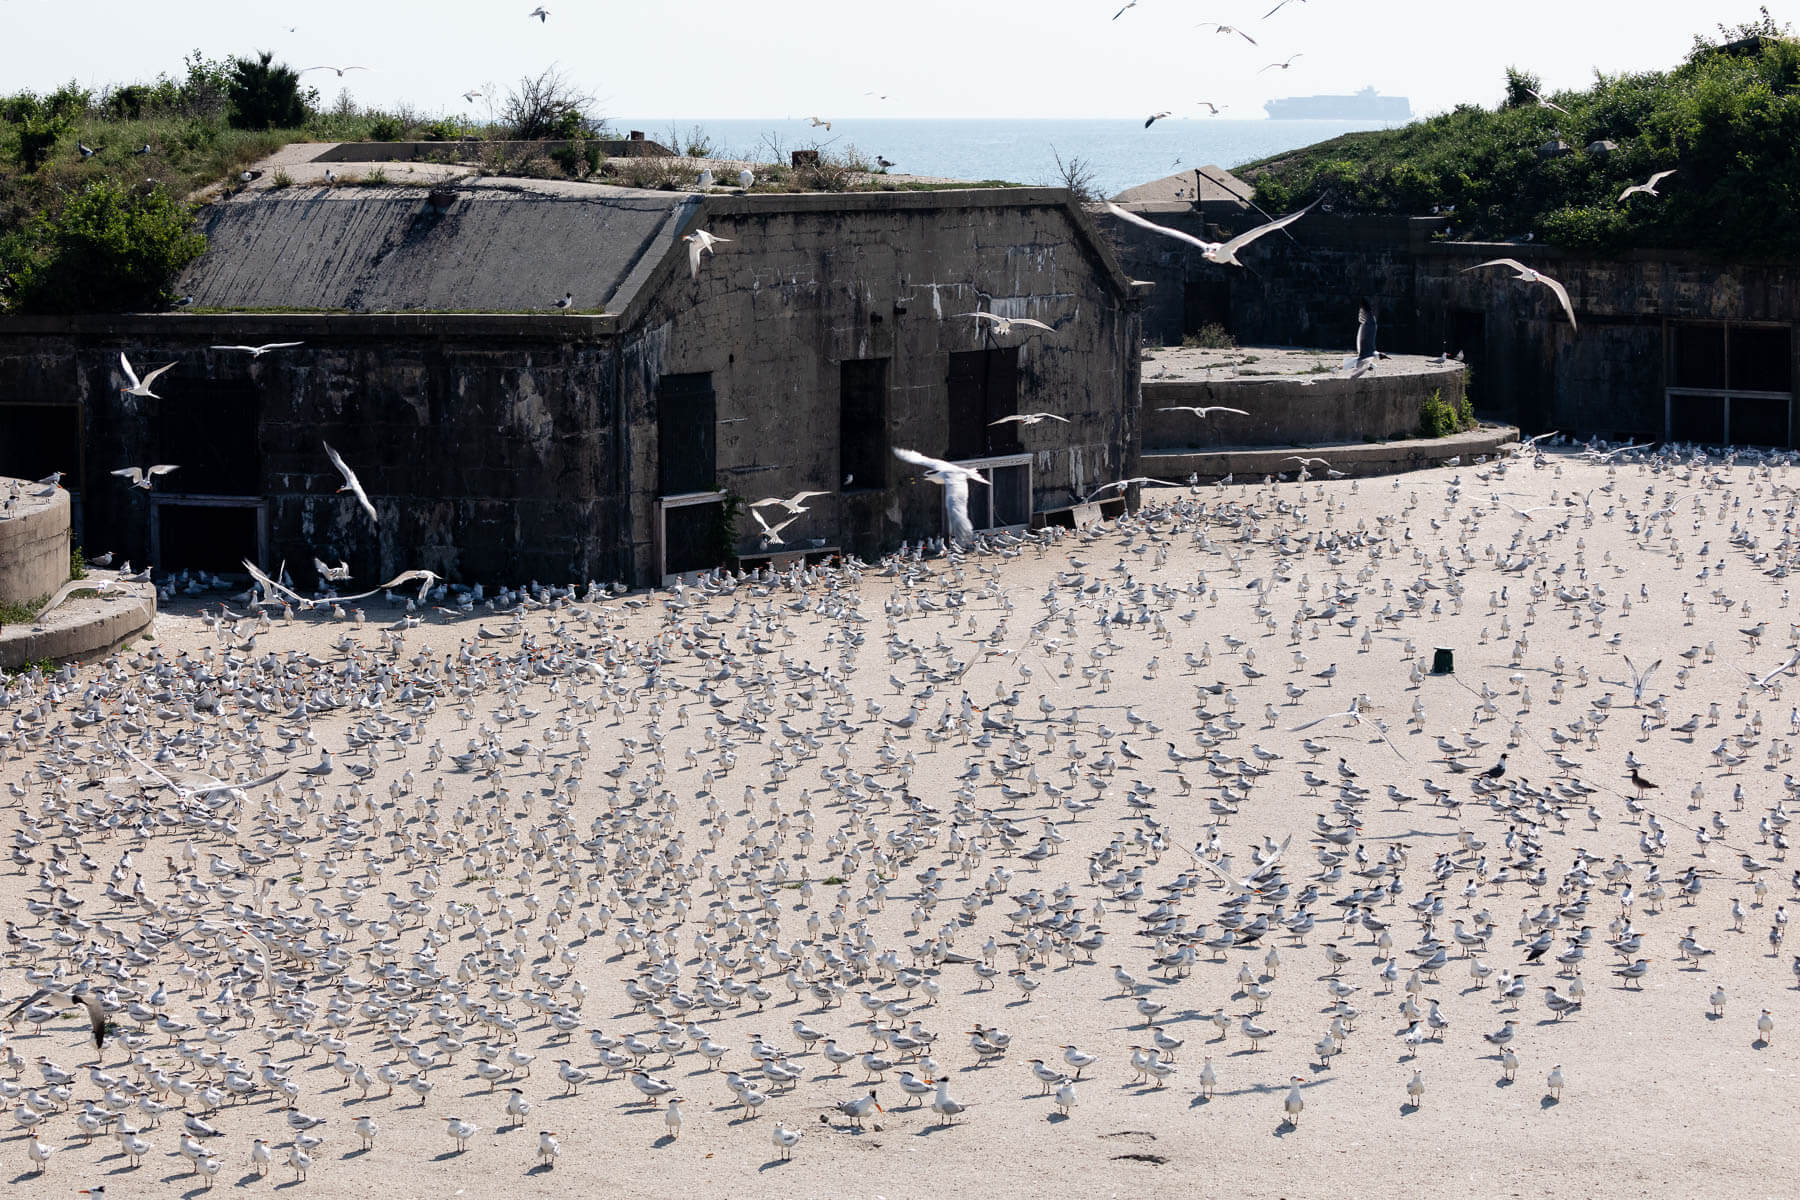 Hundreds of birds stand within the sandy interior of Fort Wool.